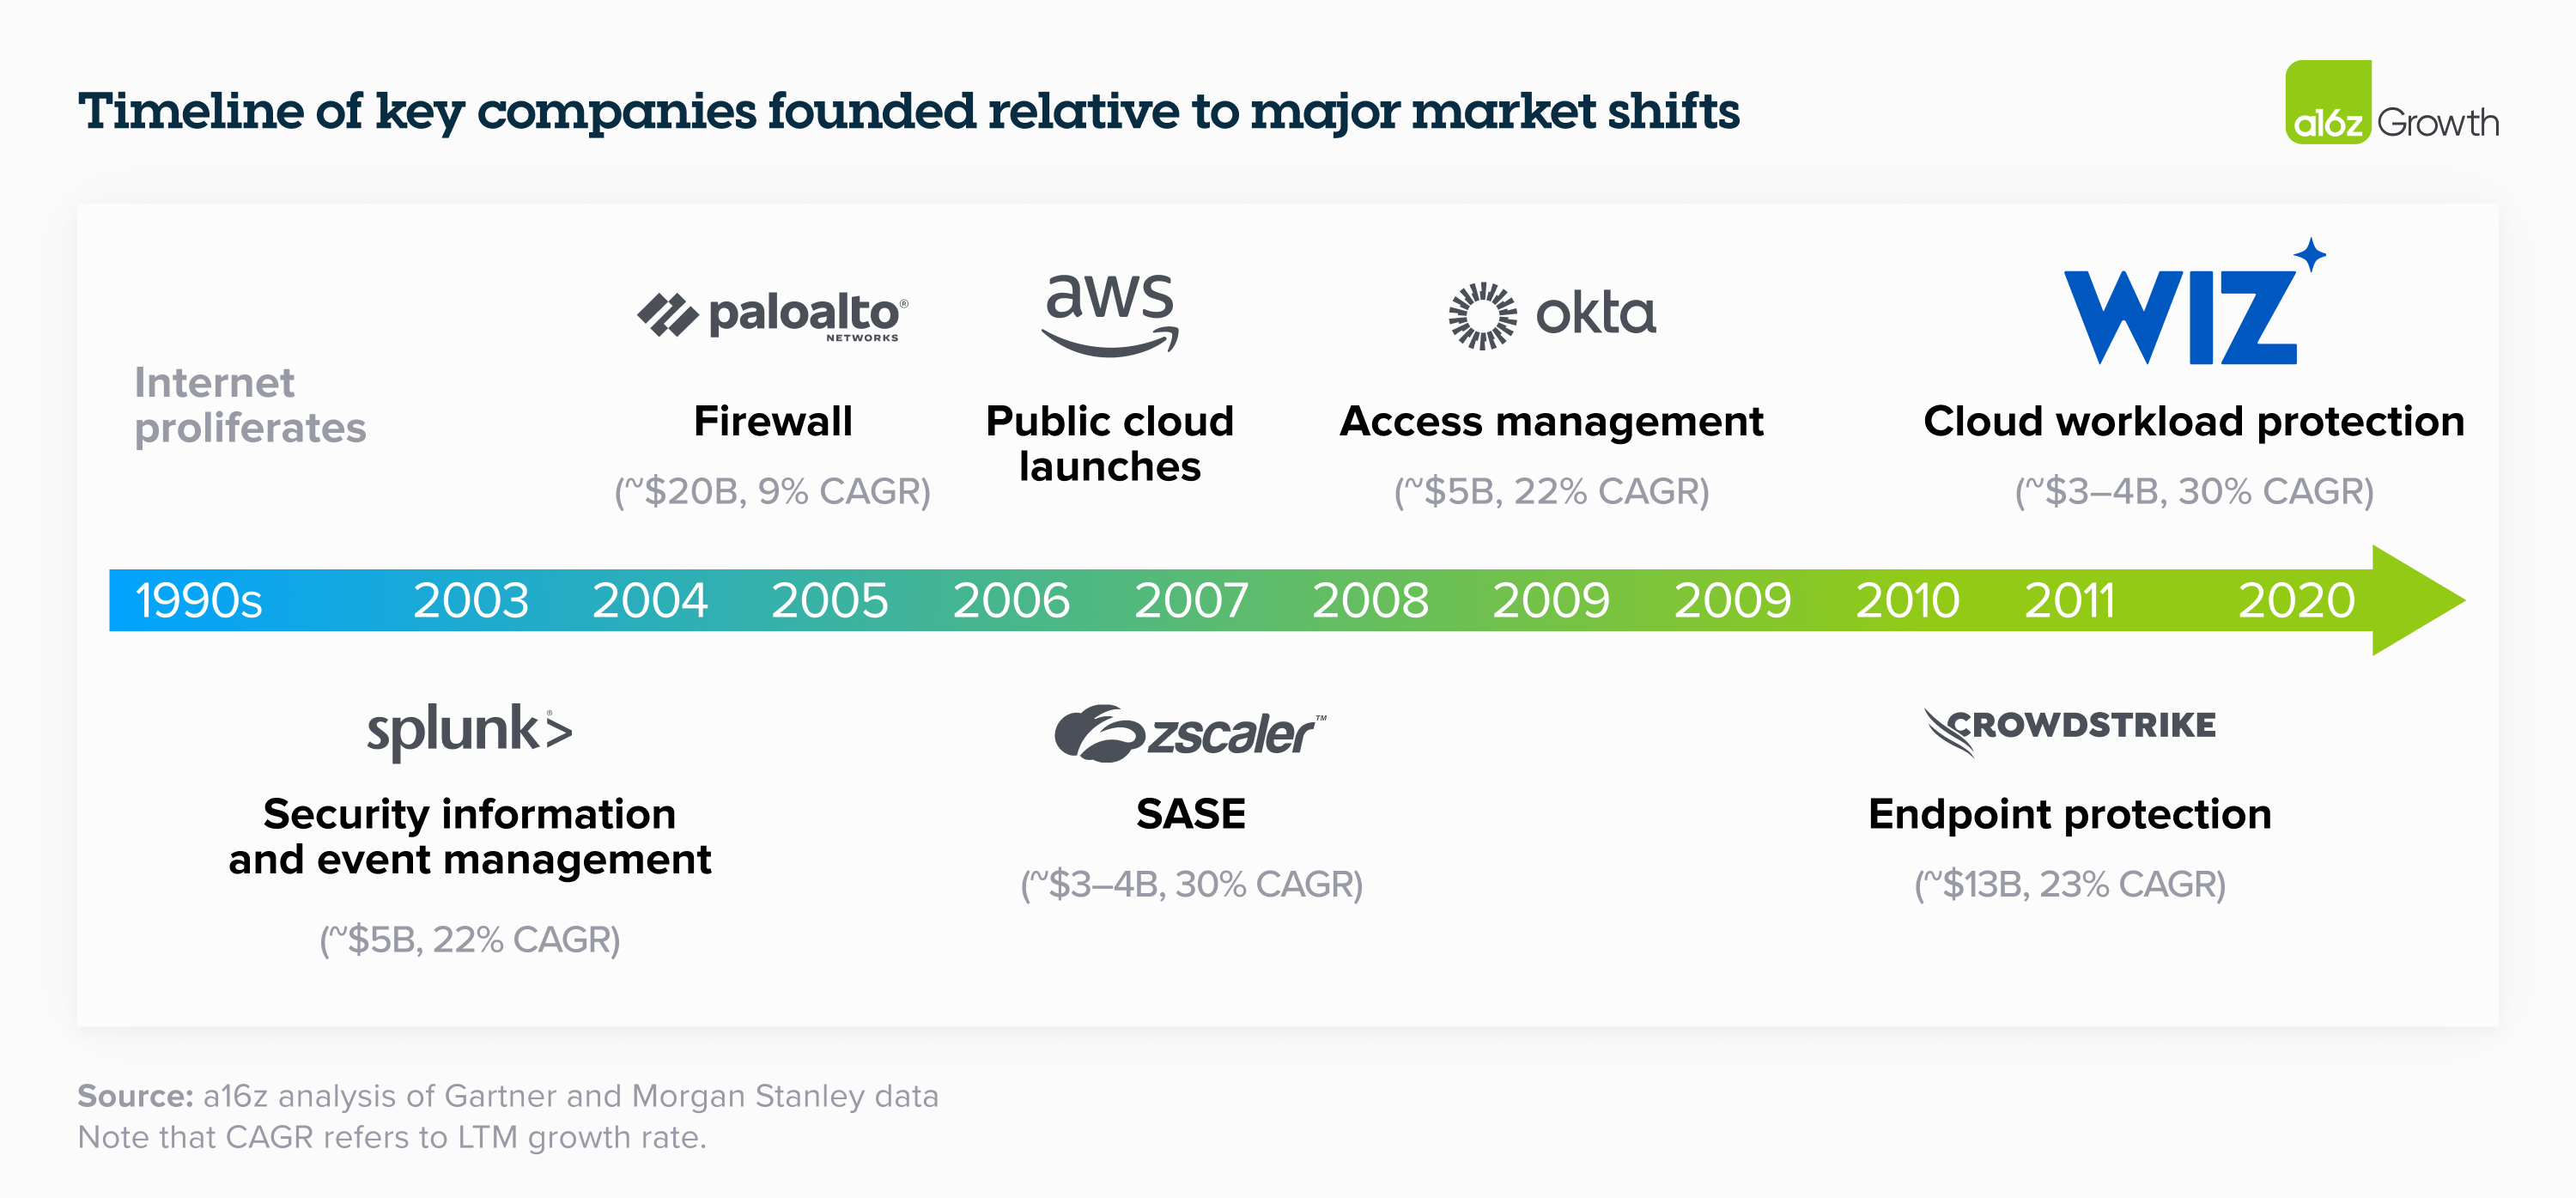 A timeline from the 1990s to 2020, showing the evolution of security platforms. The companies and respective market shifts show include Splunk in 2003, for security information and event management; Palo Alto Networks in 2005 for firewalls, the AWS launch of public cloud in 2006, Zscaler's SASE products in 2007, Okta's access management tools in 2009, Crowdstrike's endpoint protection in 2011, and Wiz's cloud workload protection in 2019.